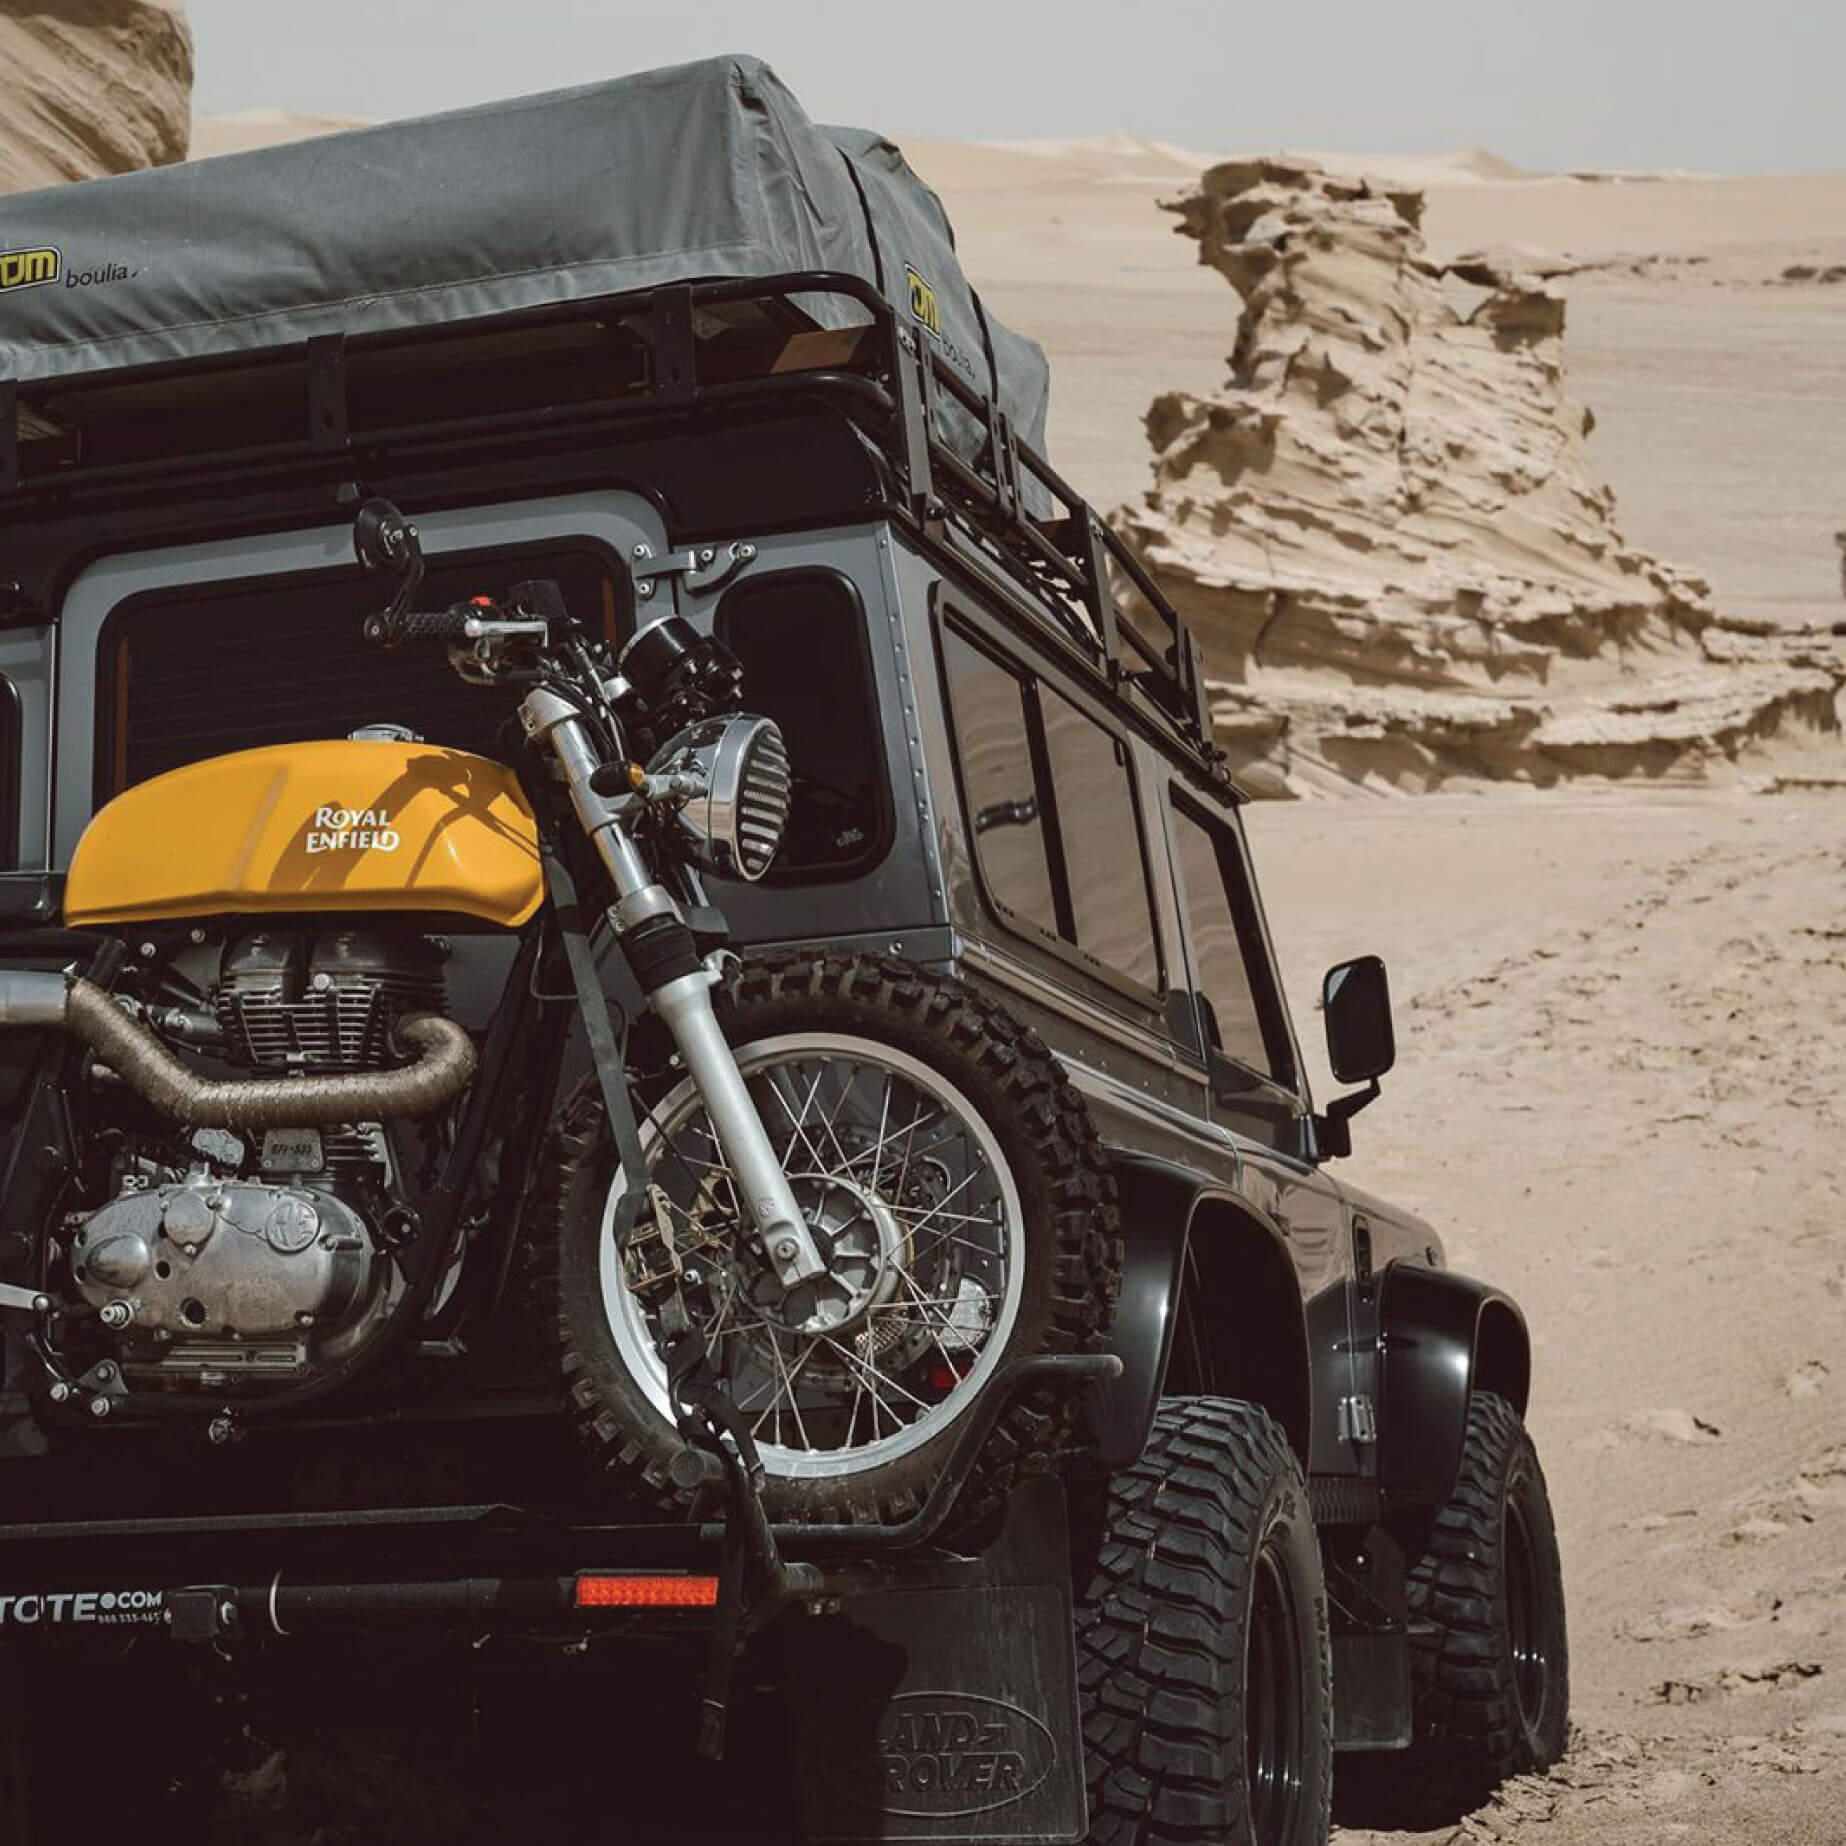 Royal Enfield Motorcycle Carrier on a Land Rover Defender